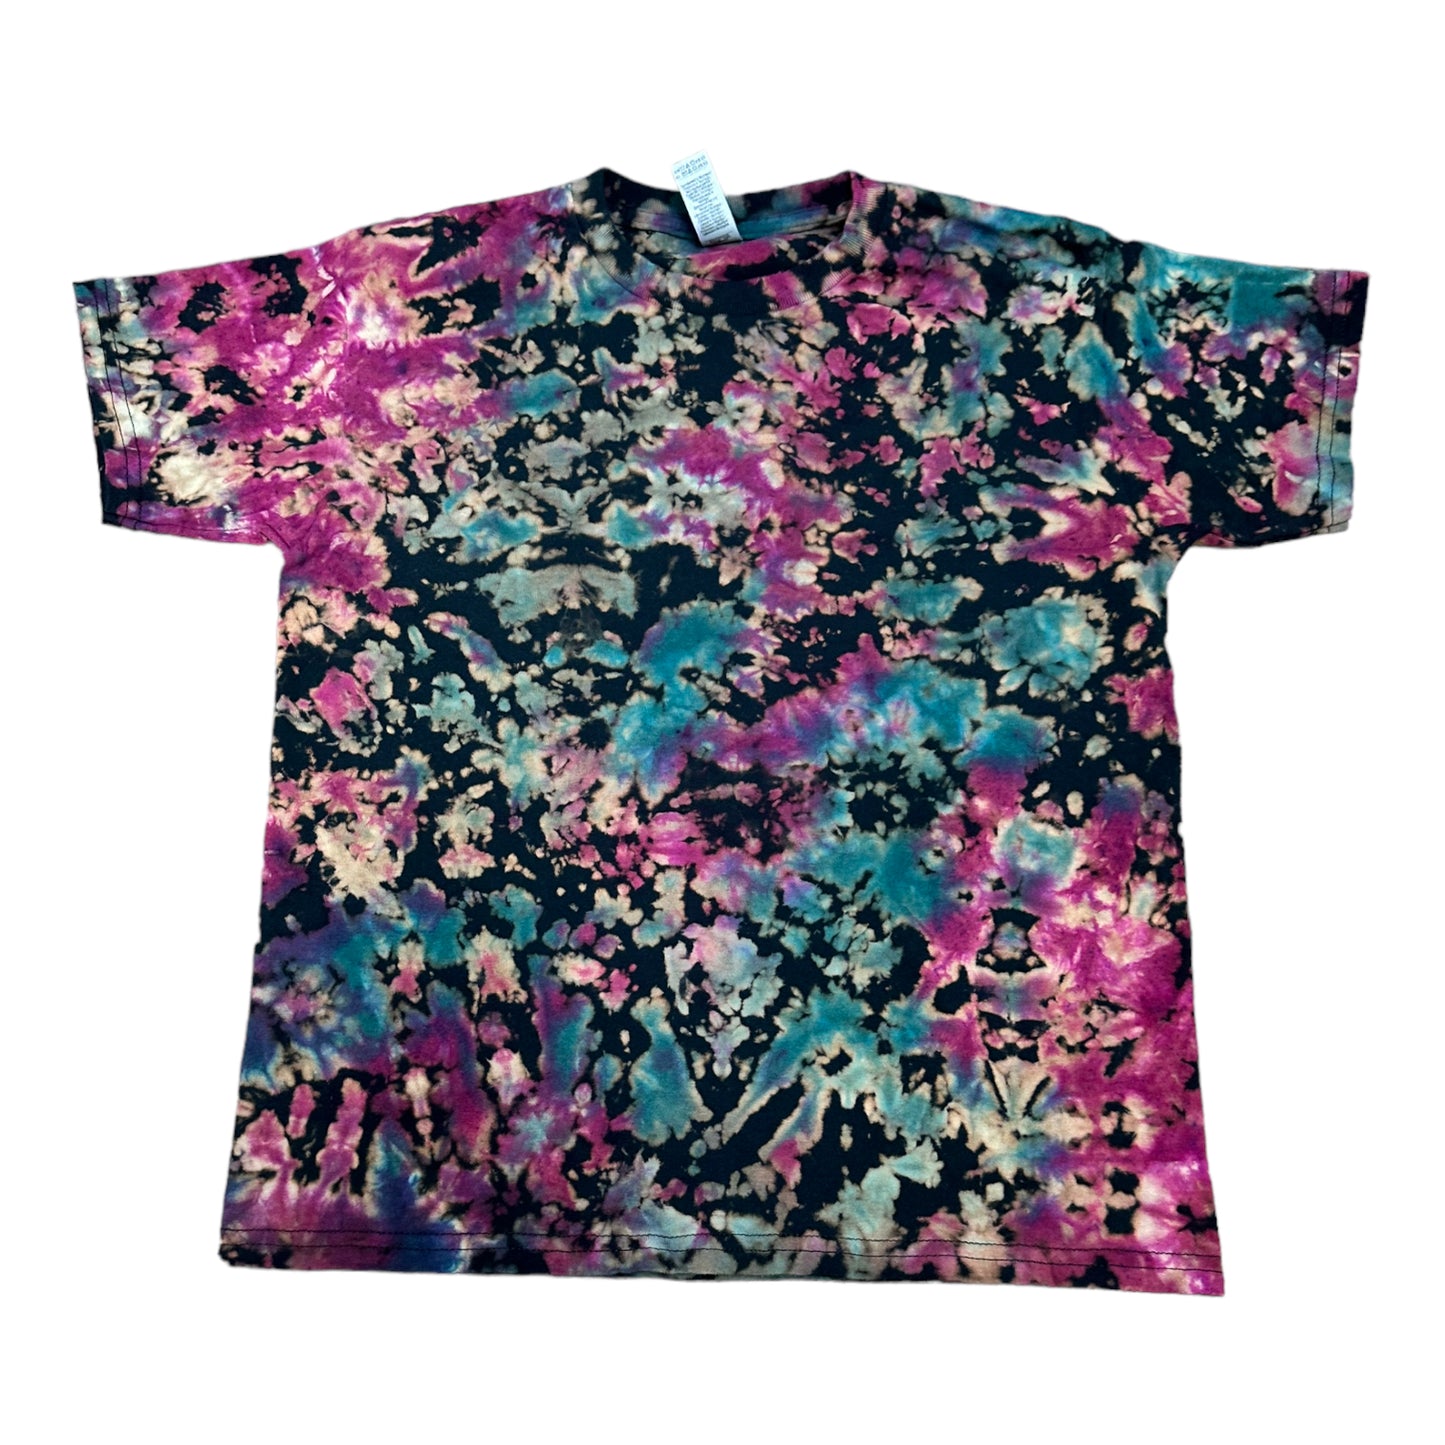 Youth Medium Purple and Turquoise Blue Scrunch Reverse Tie Dye Shirt